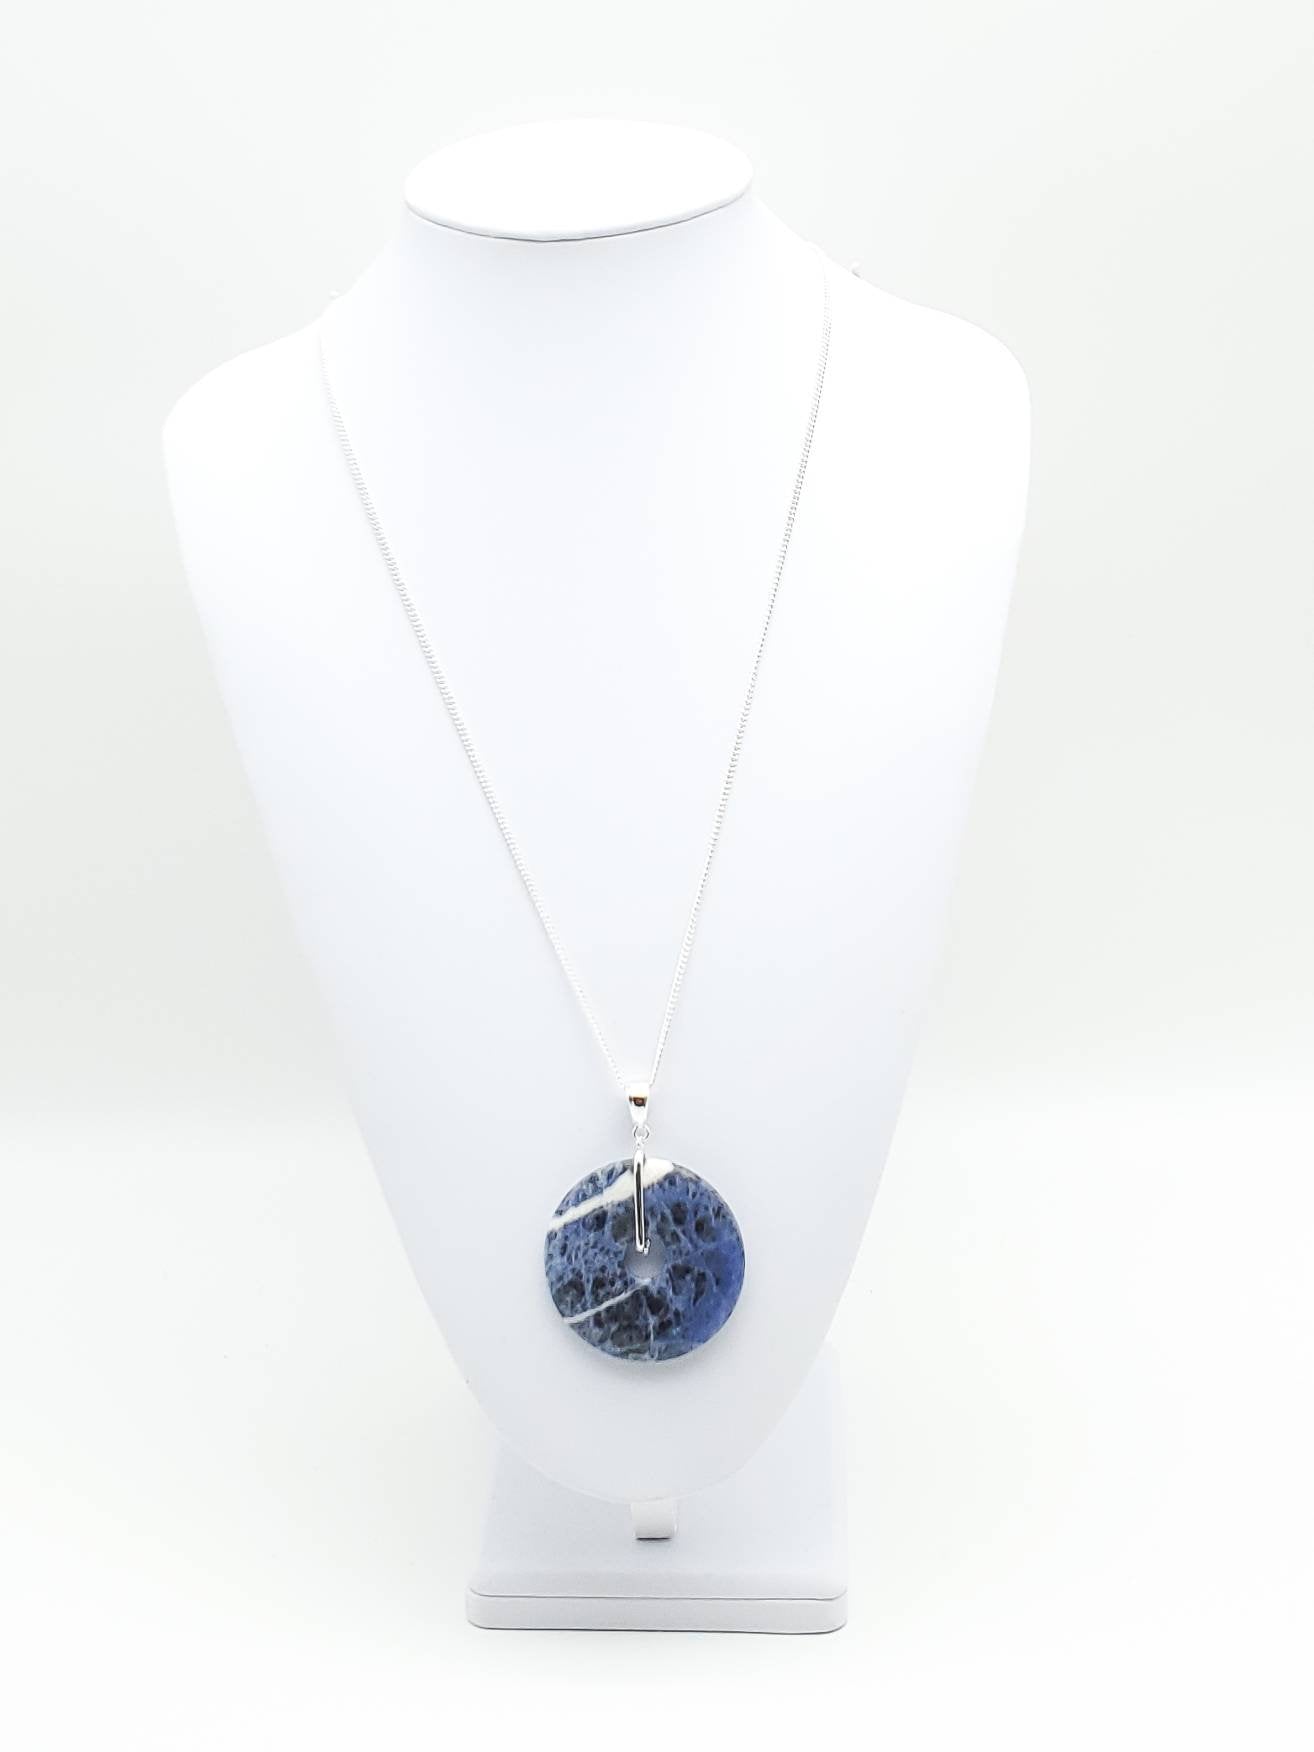 Sodalite Pendant Necklace - The Caffeinated Raven